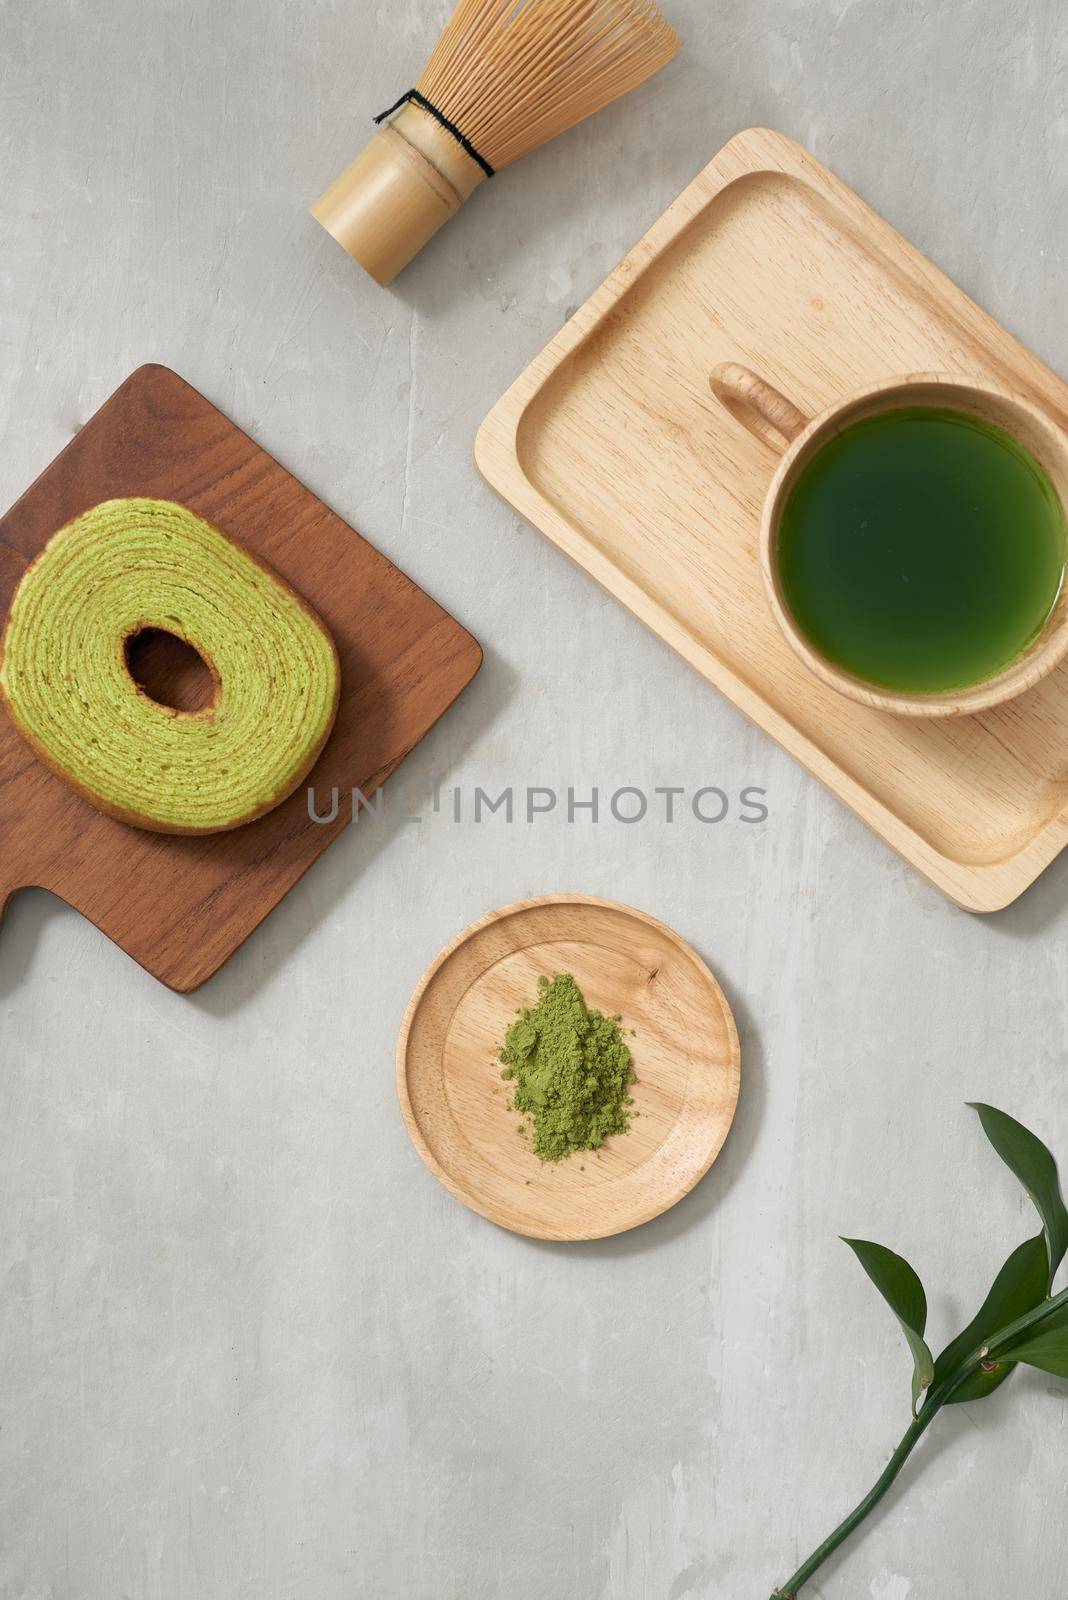 Green tea matcha in a wooden cup with German cake on the brown mat close-up by makidotvn